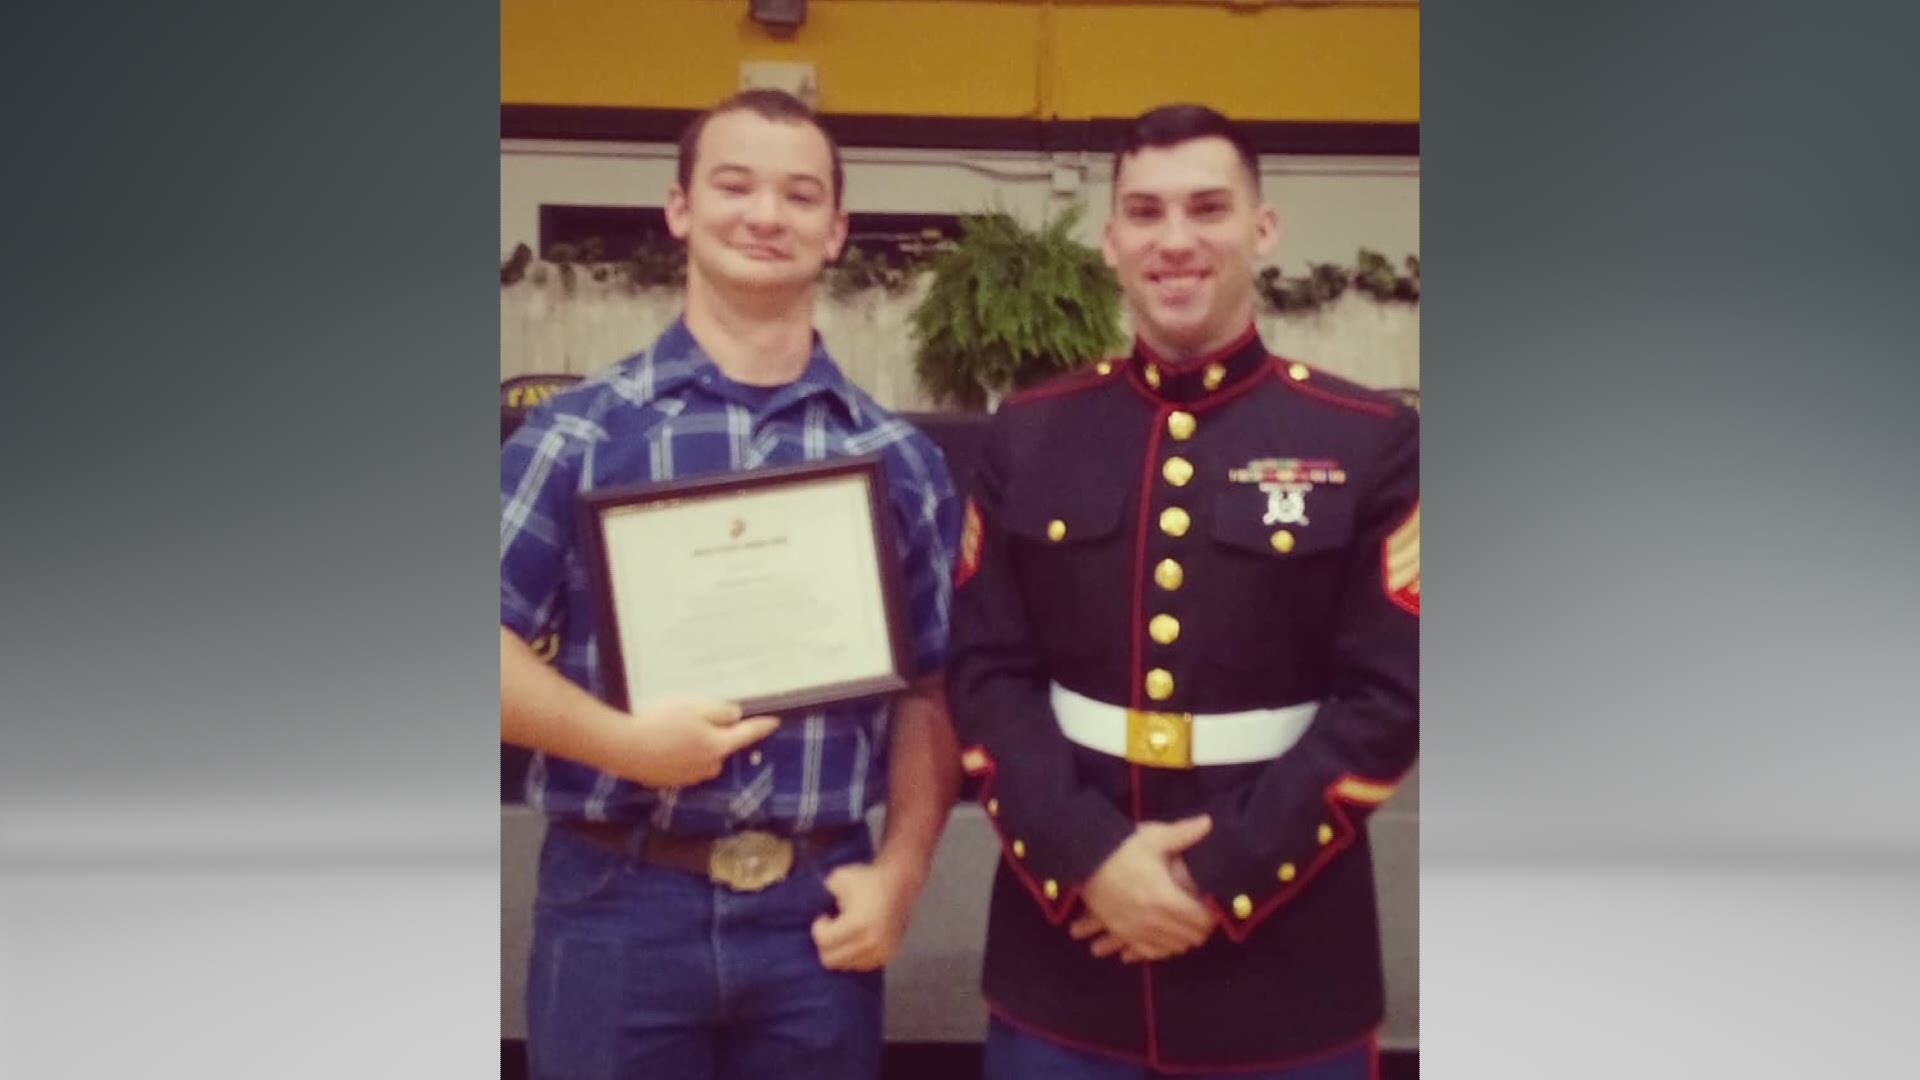 5th graders meet East Texas Marine they sent letters to while at boot camp